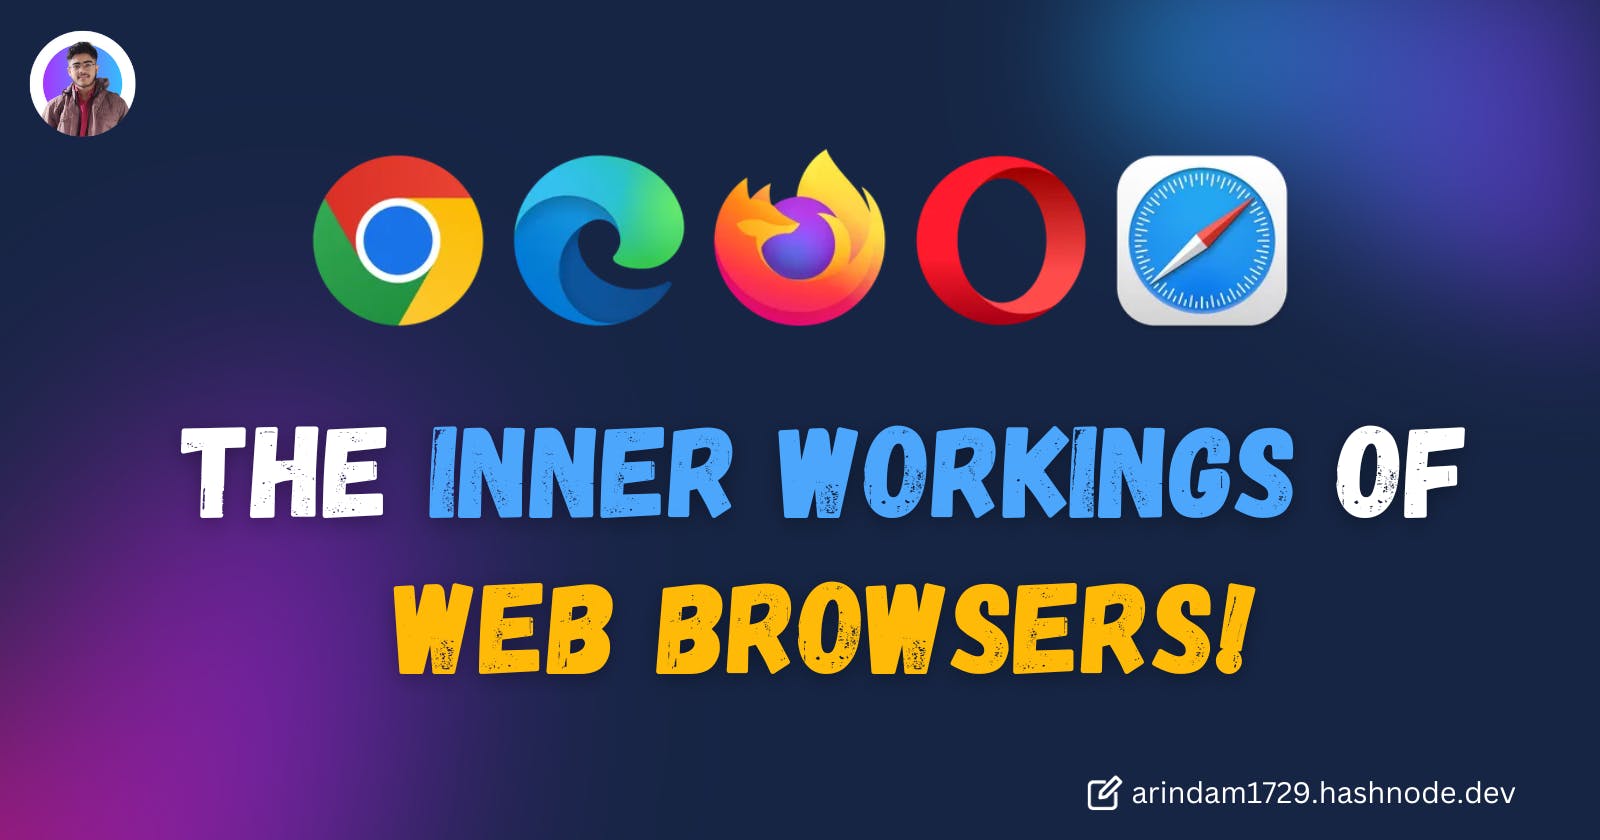 The Inner Workings of Web Browsers!